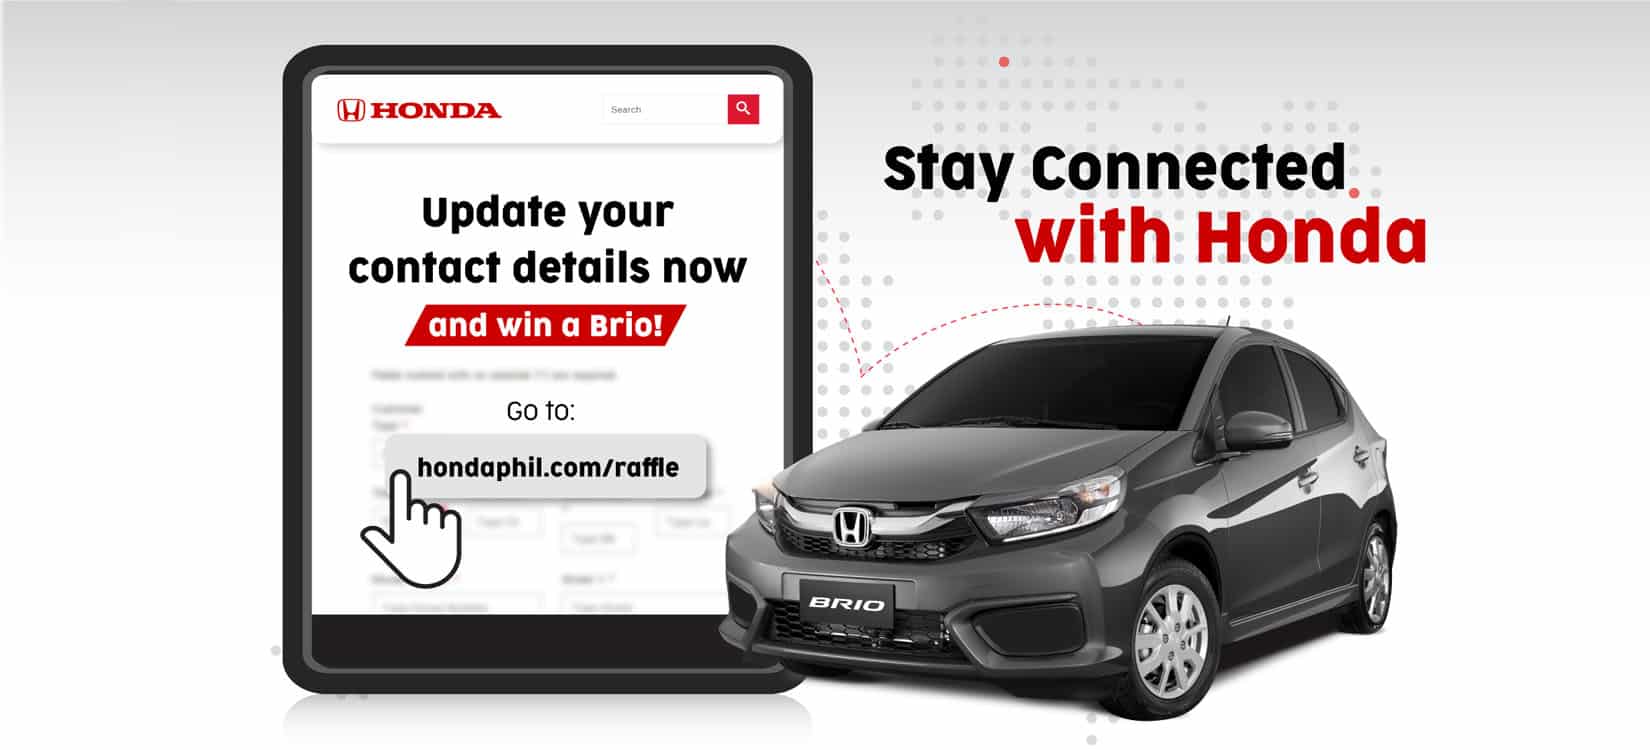 Honda encourages owners to update their contact information for a chance to win Honda Brio, other exciting prizes